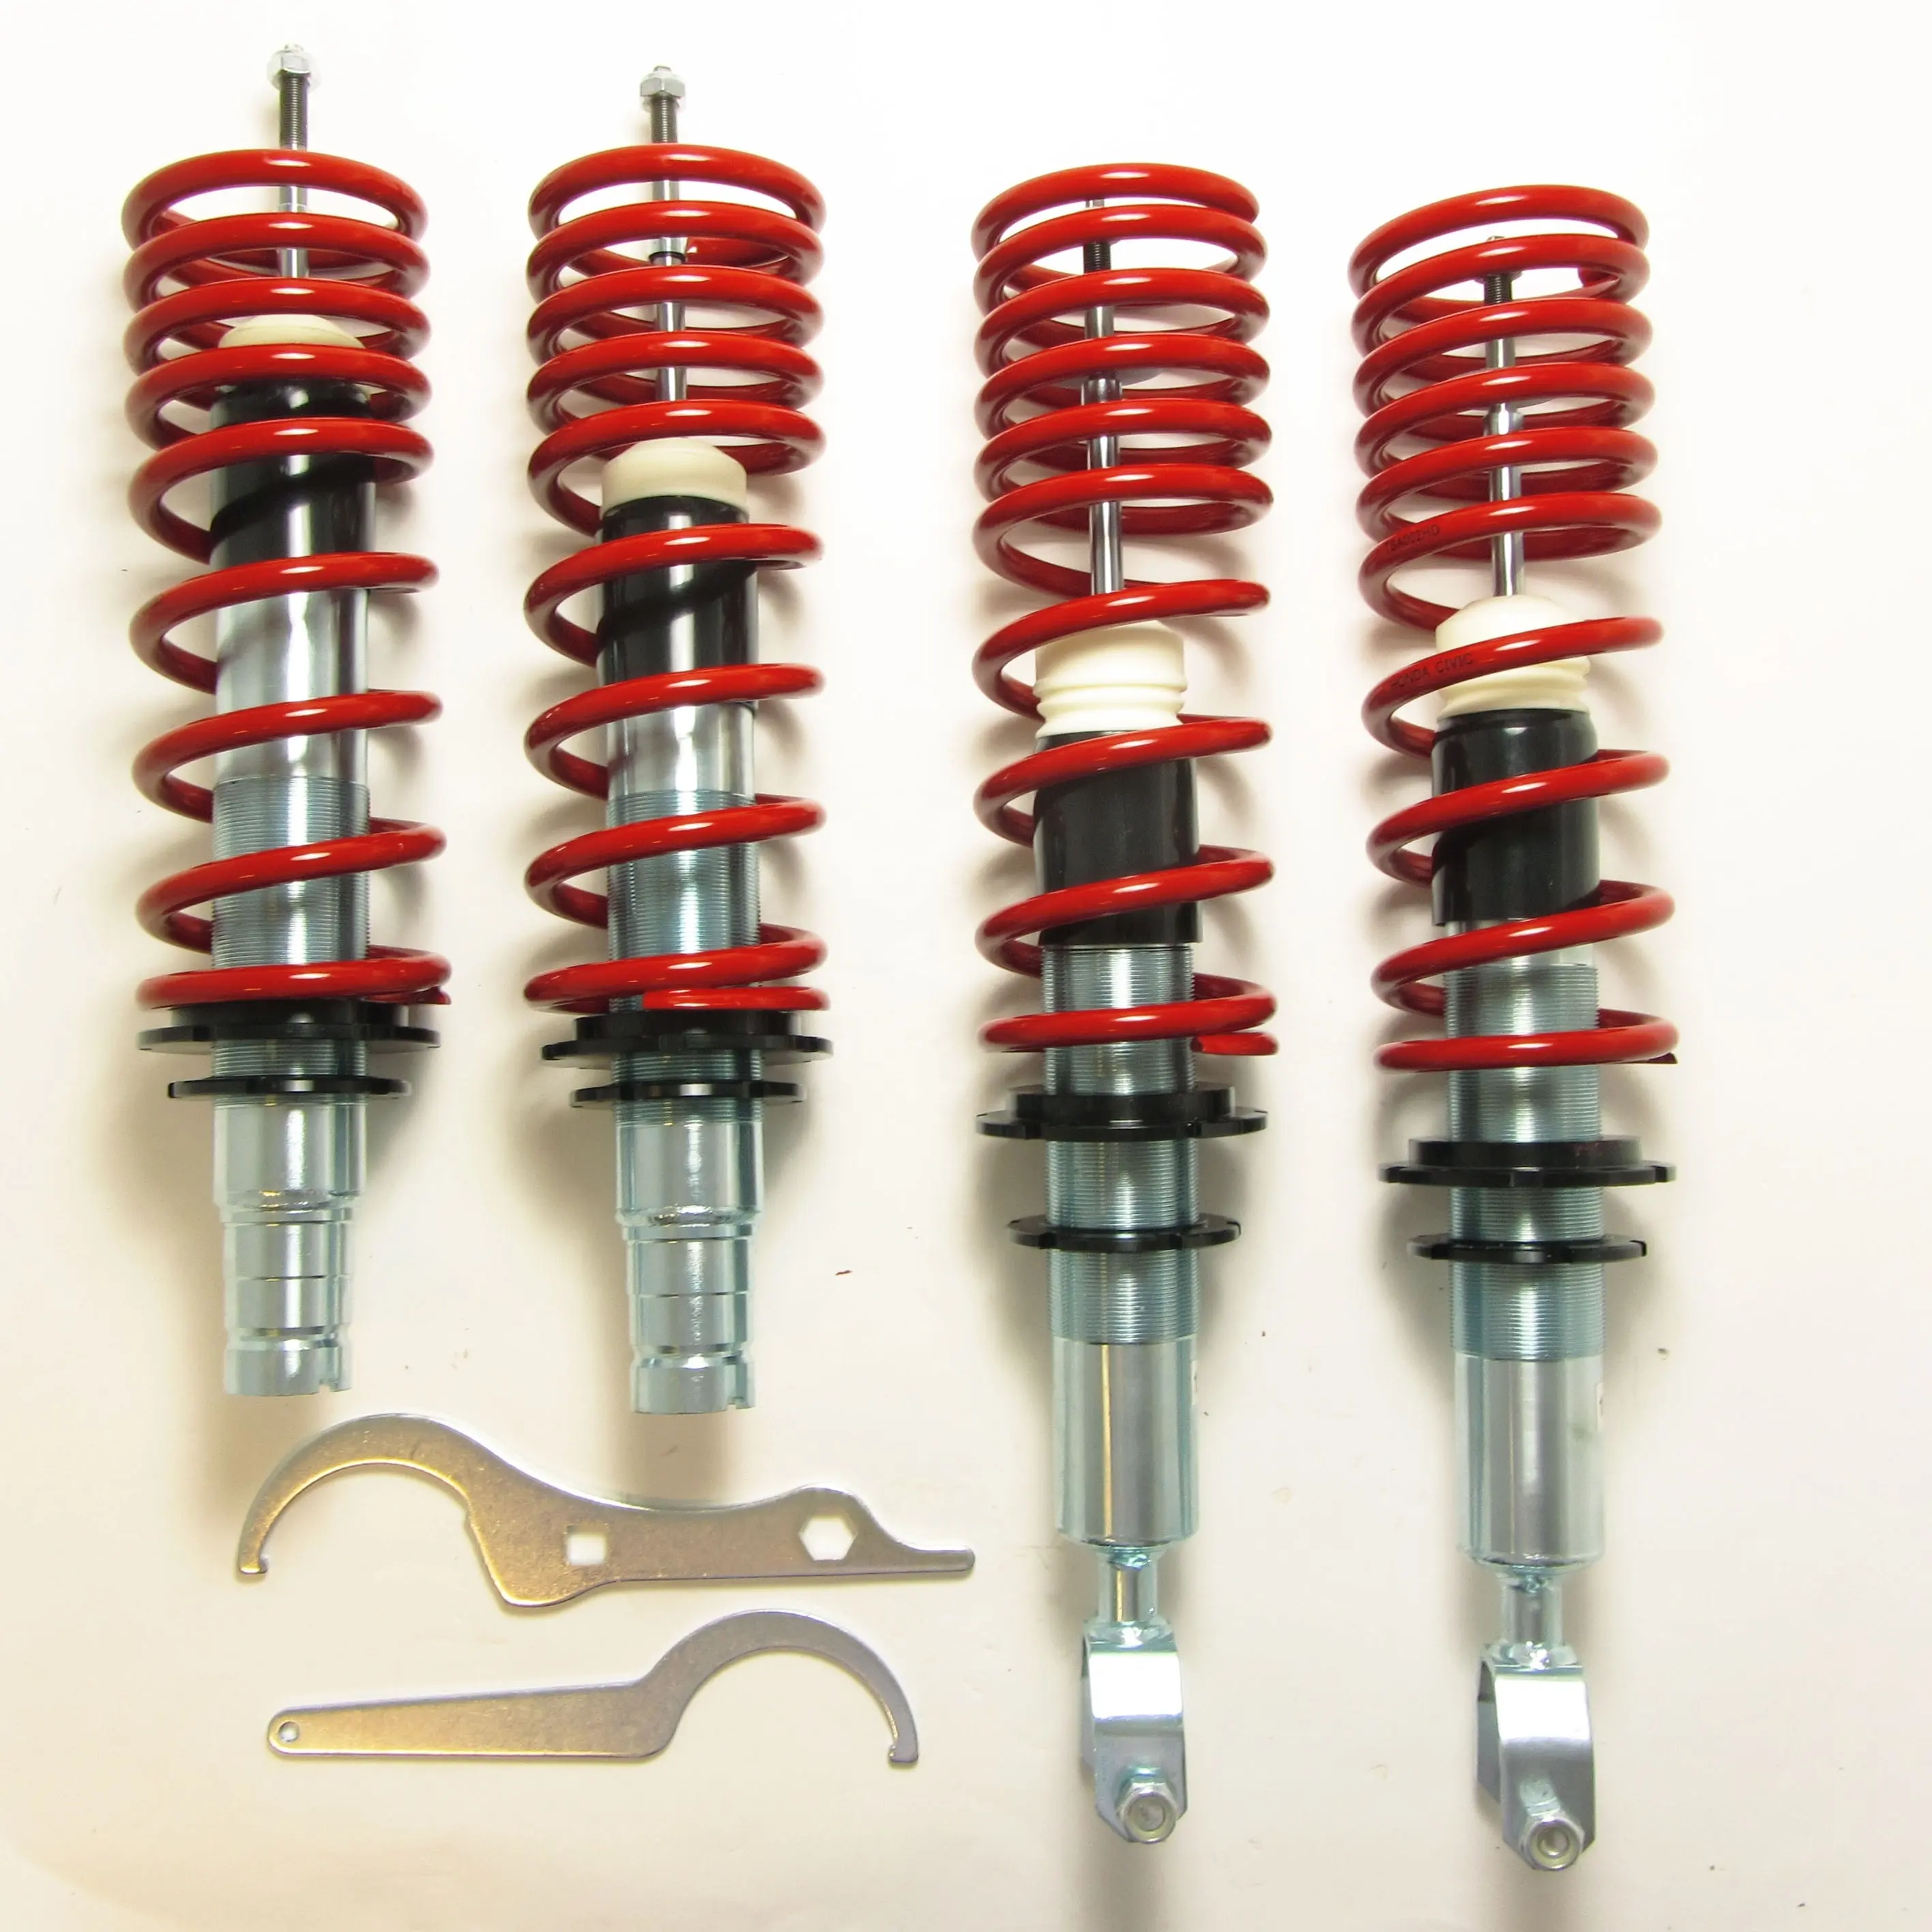 Wholesale Adjustable Coilover Suspension Kits shock absorber For Honda Civic and CRX all models 5 - 118KW